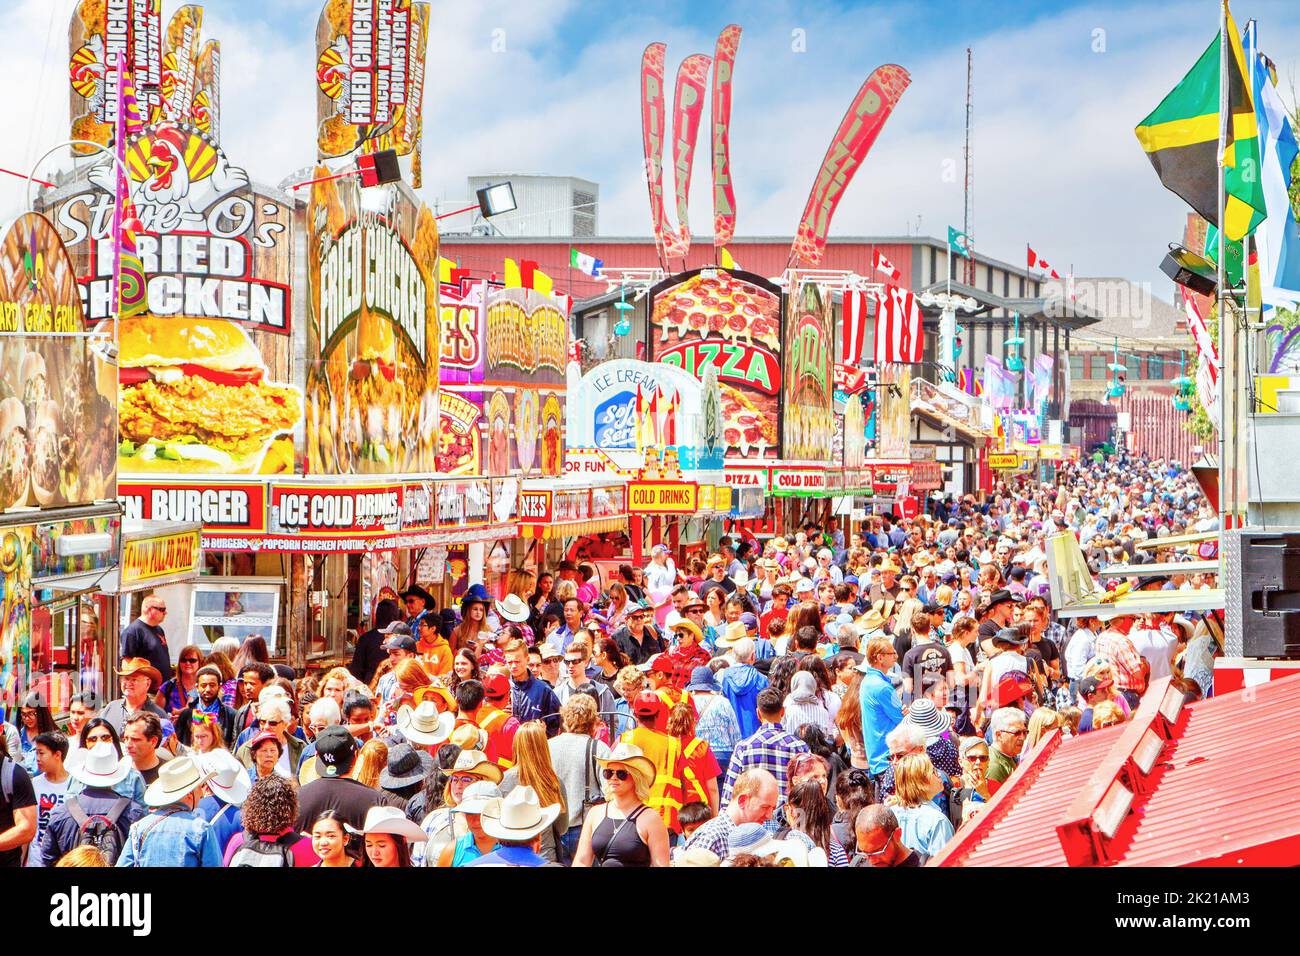 CALGARY, CANADA - July 9, 2019: A crowd filled the street during rush hour at the annual Calgary Stampede. The Calgary Stampede is often called the gr Stock Photo